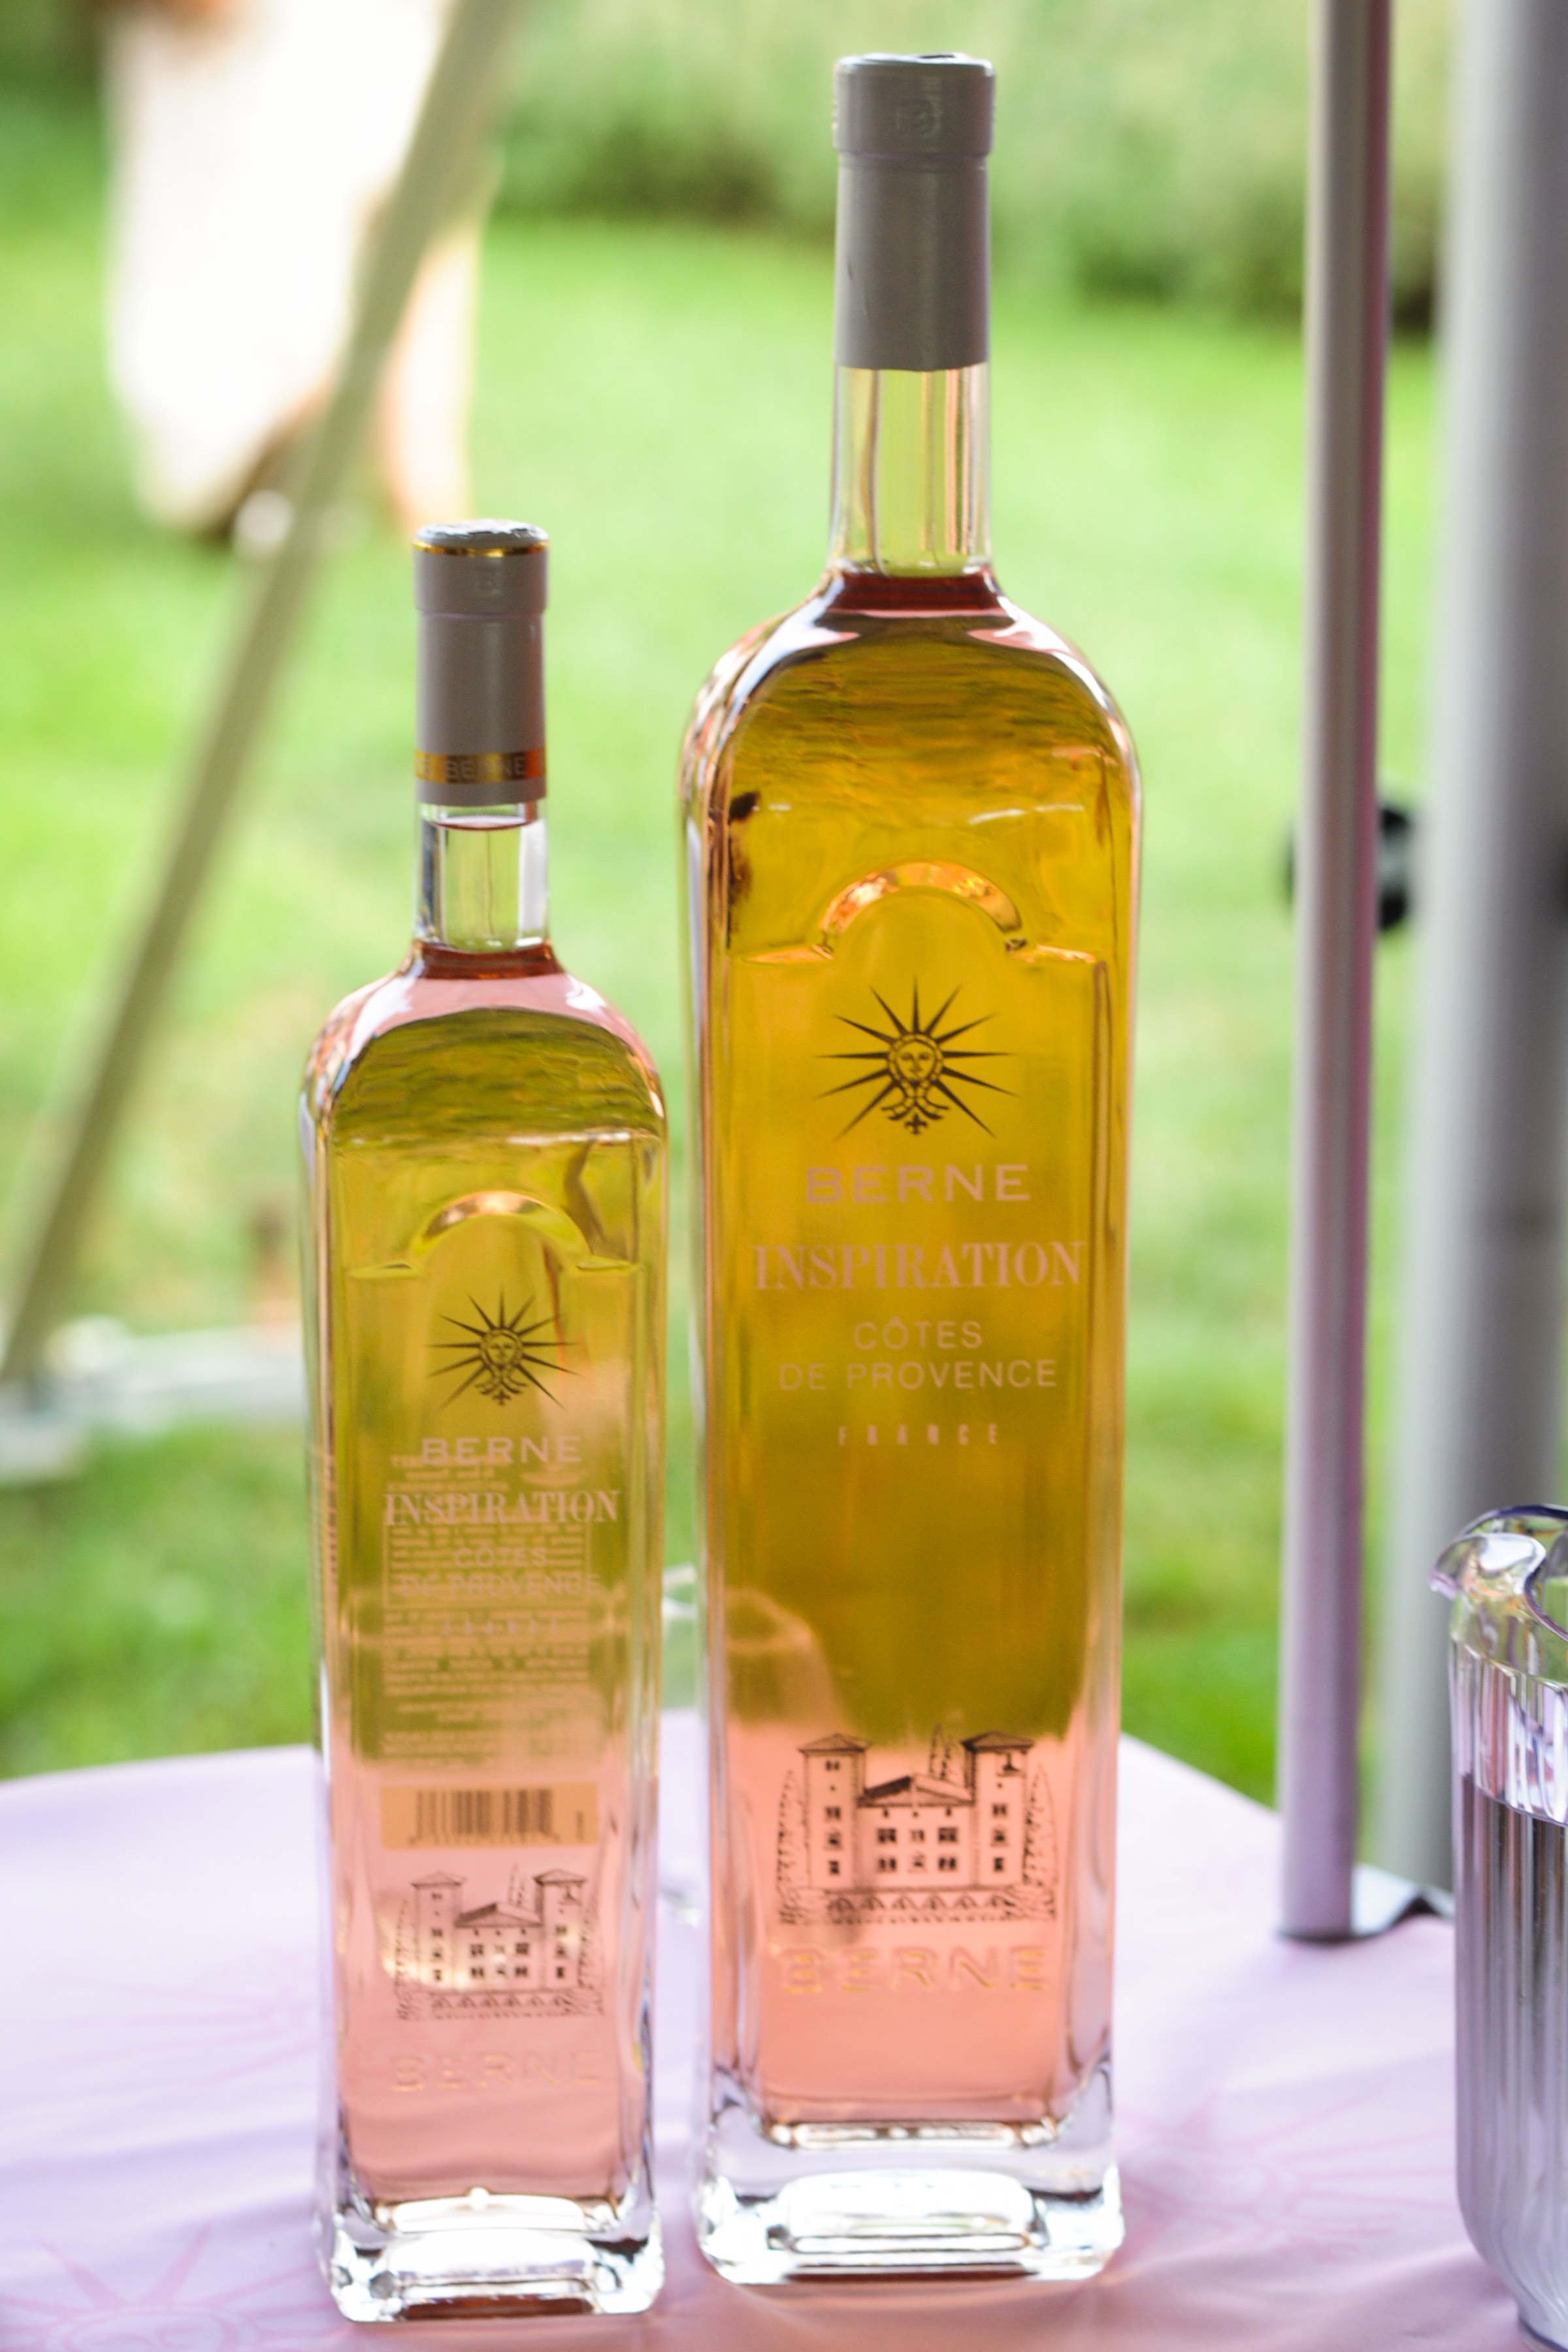 New York Wine Events hosts 2 rosé wine and food events presented by Citi.  Summer Rosé & Bubbly Fest takes place at RGNY on LI's North Fork July 20 and Rosé Splash sails The Spirit of New York Aug. 3.